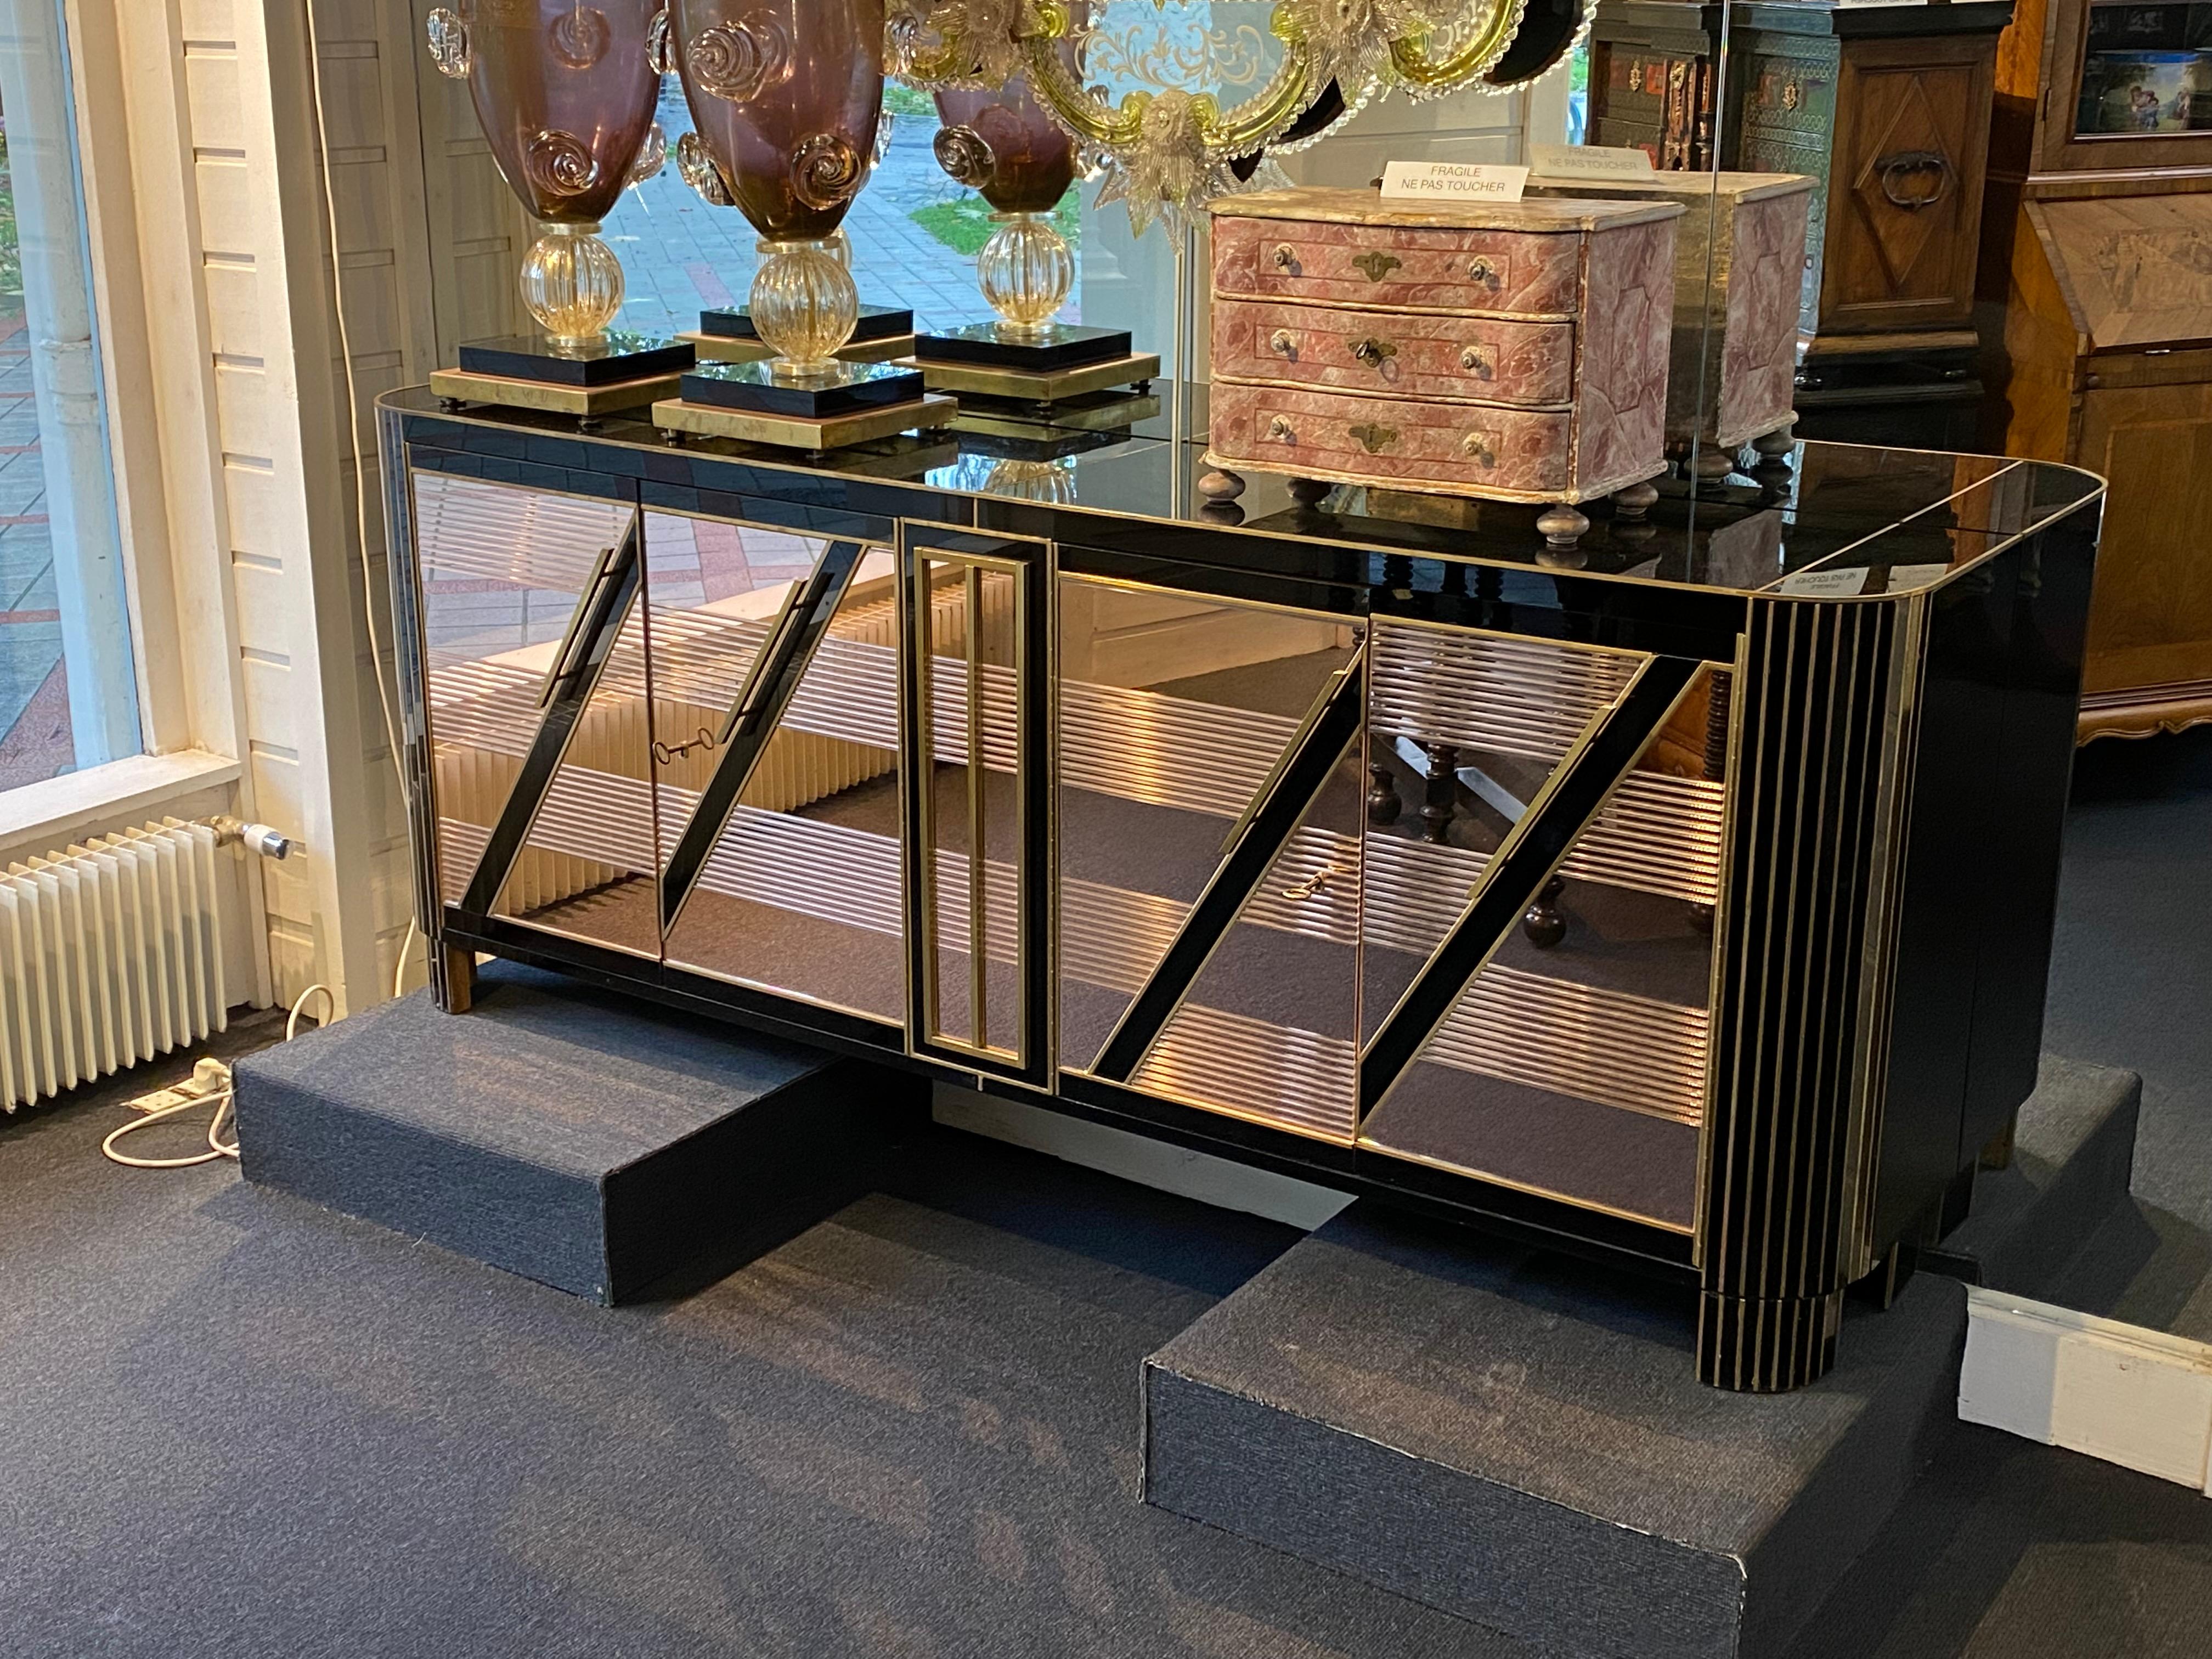 Stylish vintage Italian commode made of Murano tinted glass and brass inserts.
Very elegant in this combination of black and bronze colors.

The chest of drawers is based on a vintage wooden frame, partially covered with black fabric on the inside